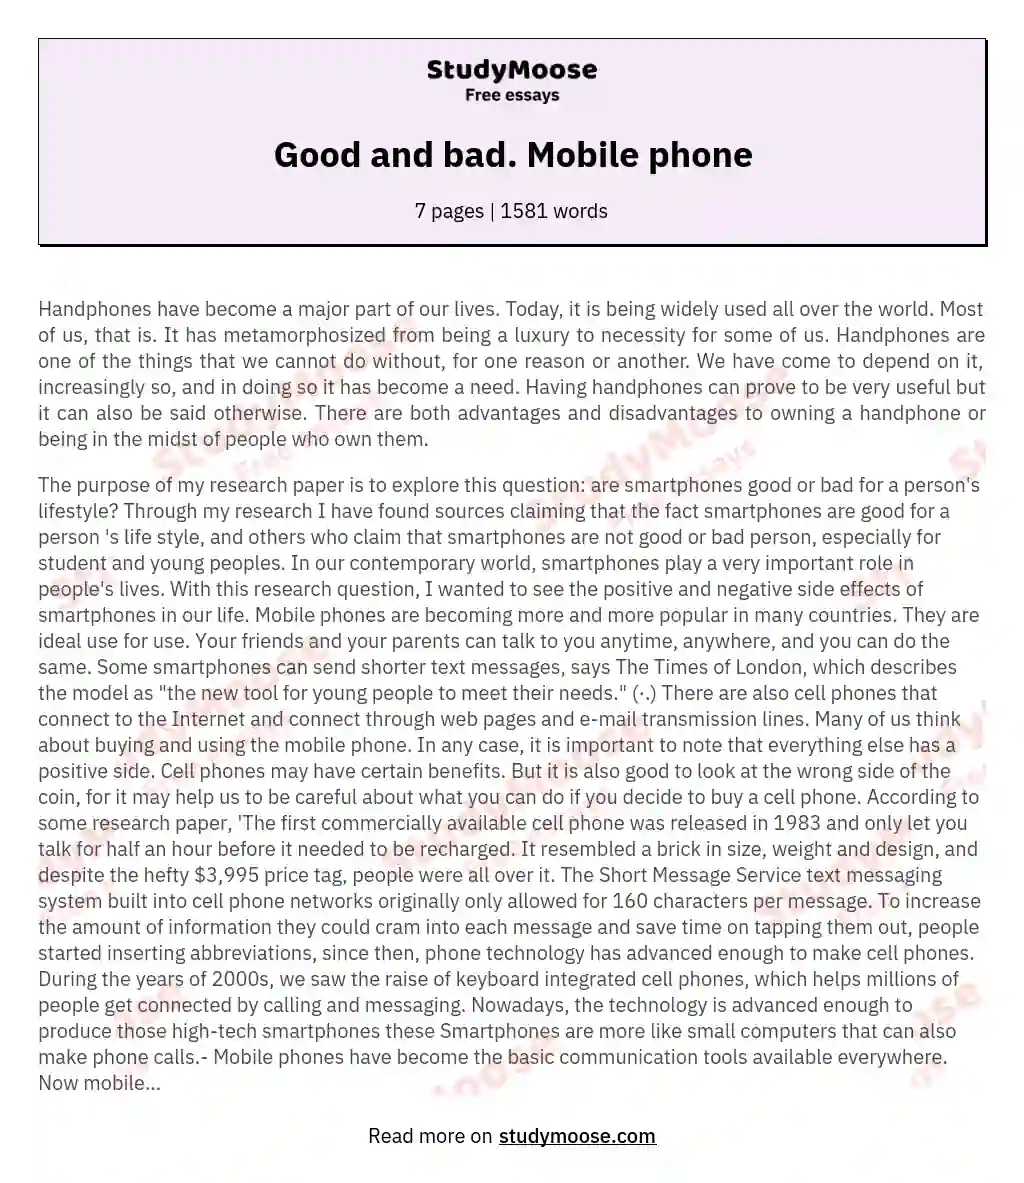 Good and bad. Mobile phone essay